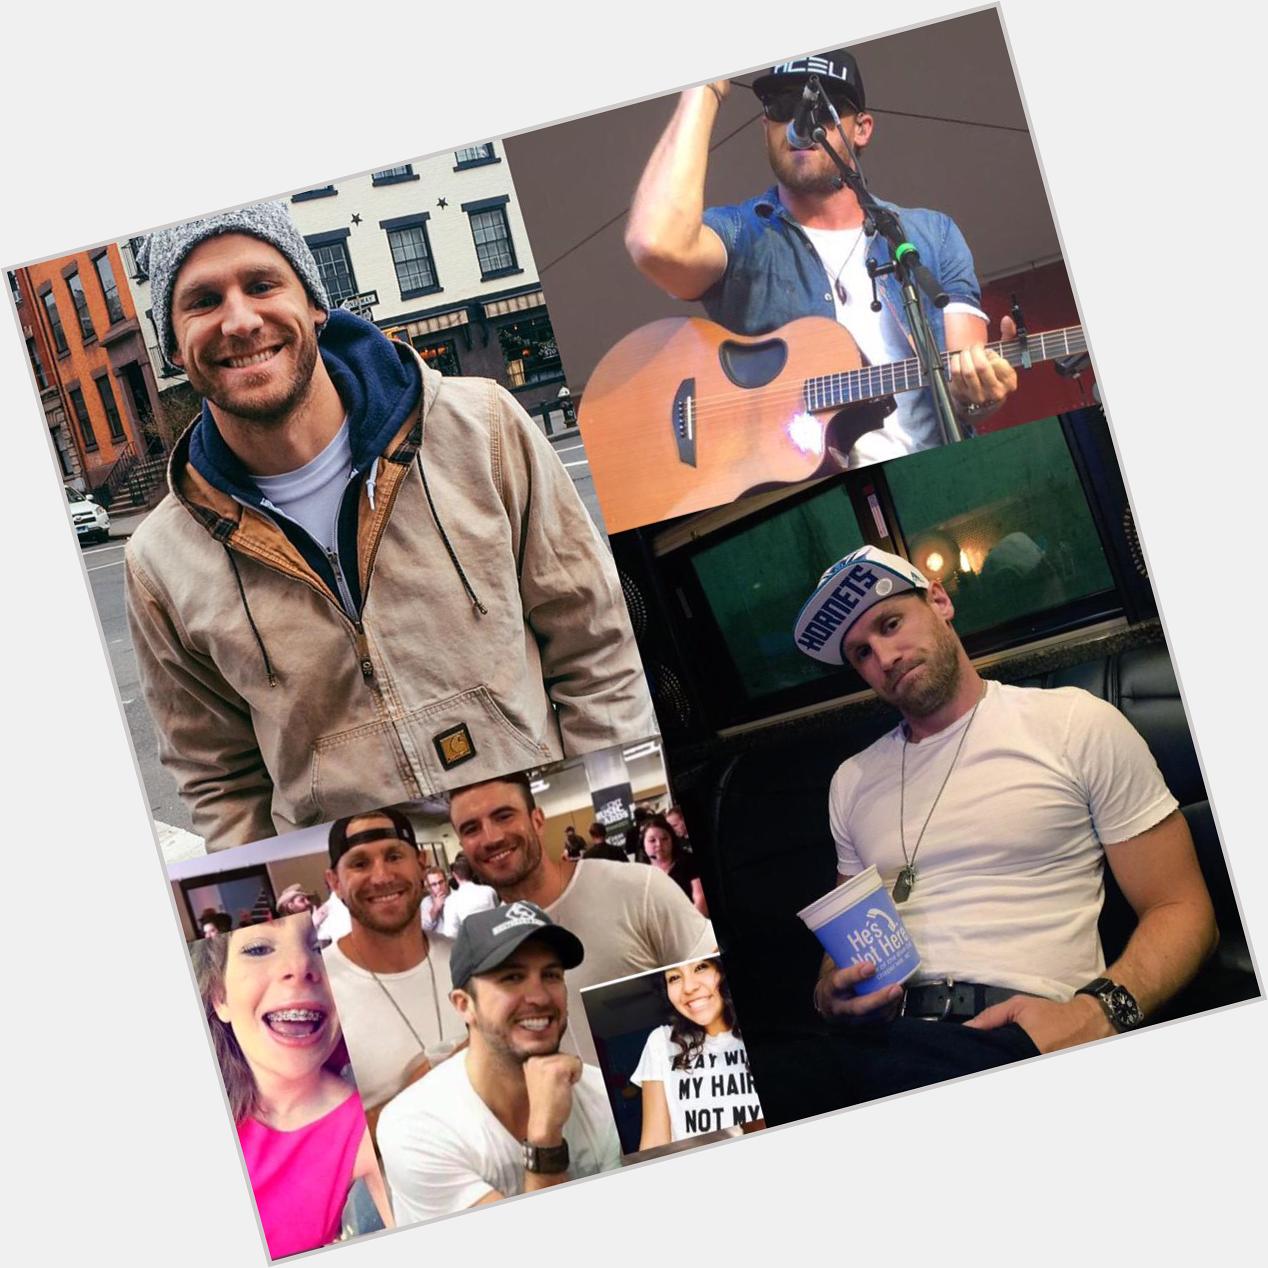 HAPPY BIRTHDAY TO MY BOYS CHASE RICE!!! I love you and hope you have a great day!!  